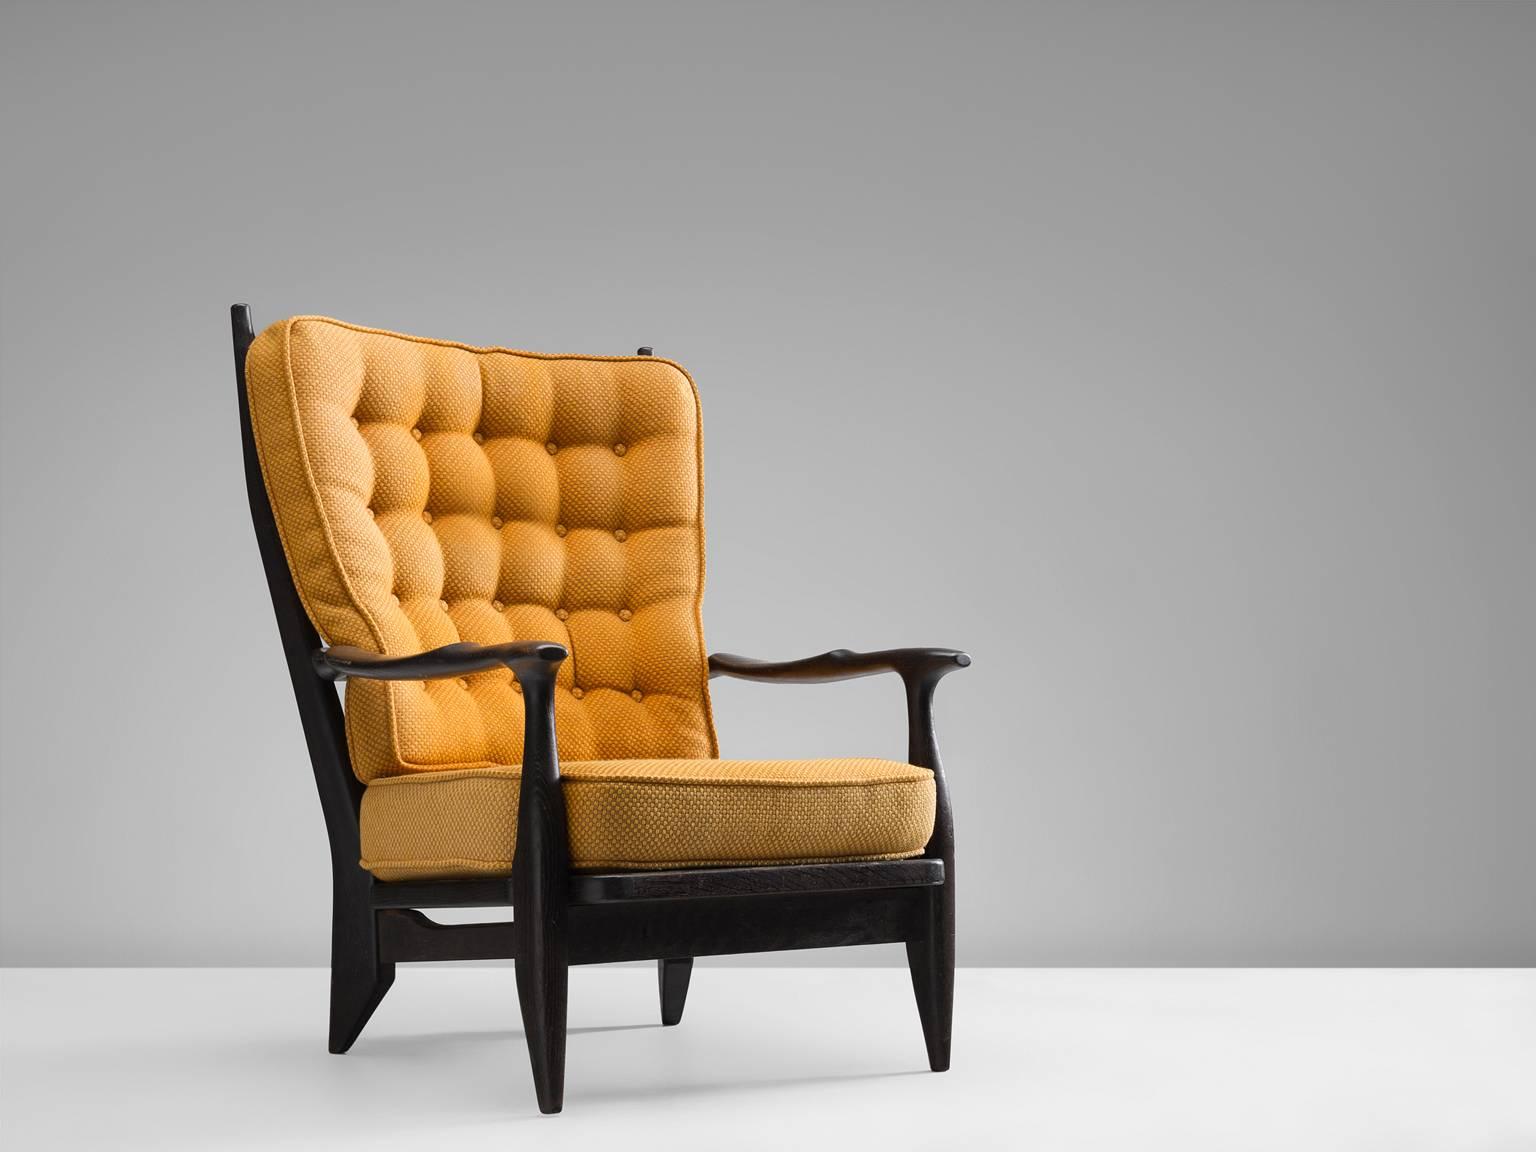 Lounge chair in black stained oak, with a curry colored upholstery by Guillerme et Chambron, France, 1960s. 

Guillerme and Chambron are known for their high quality solid oak furniture, from which this is another great example. This chair has a